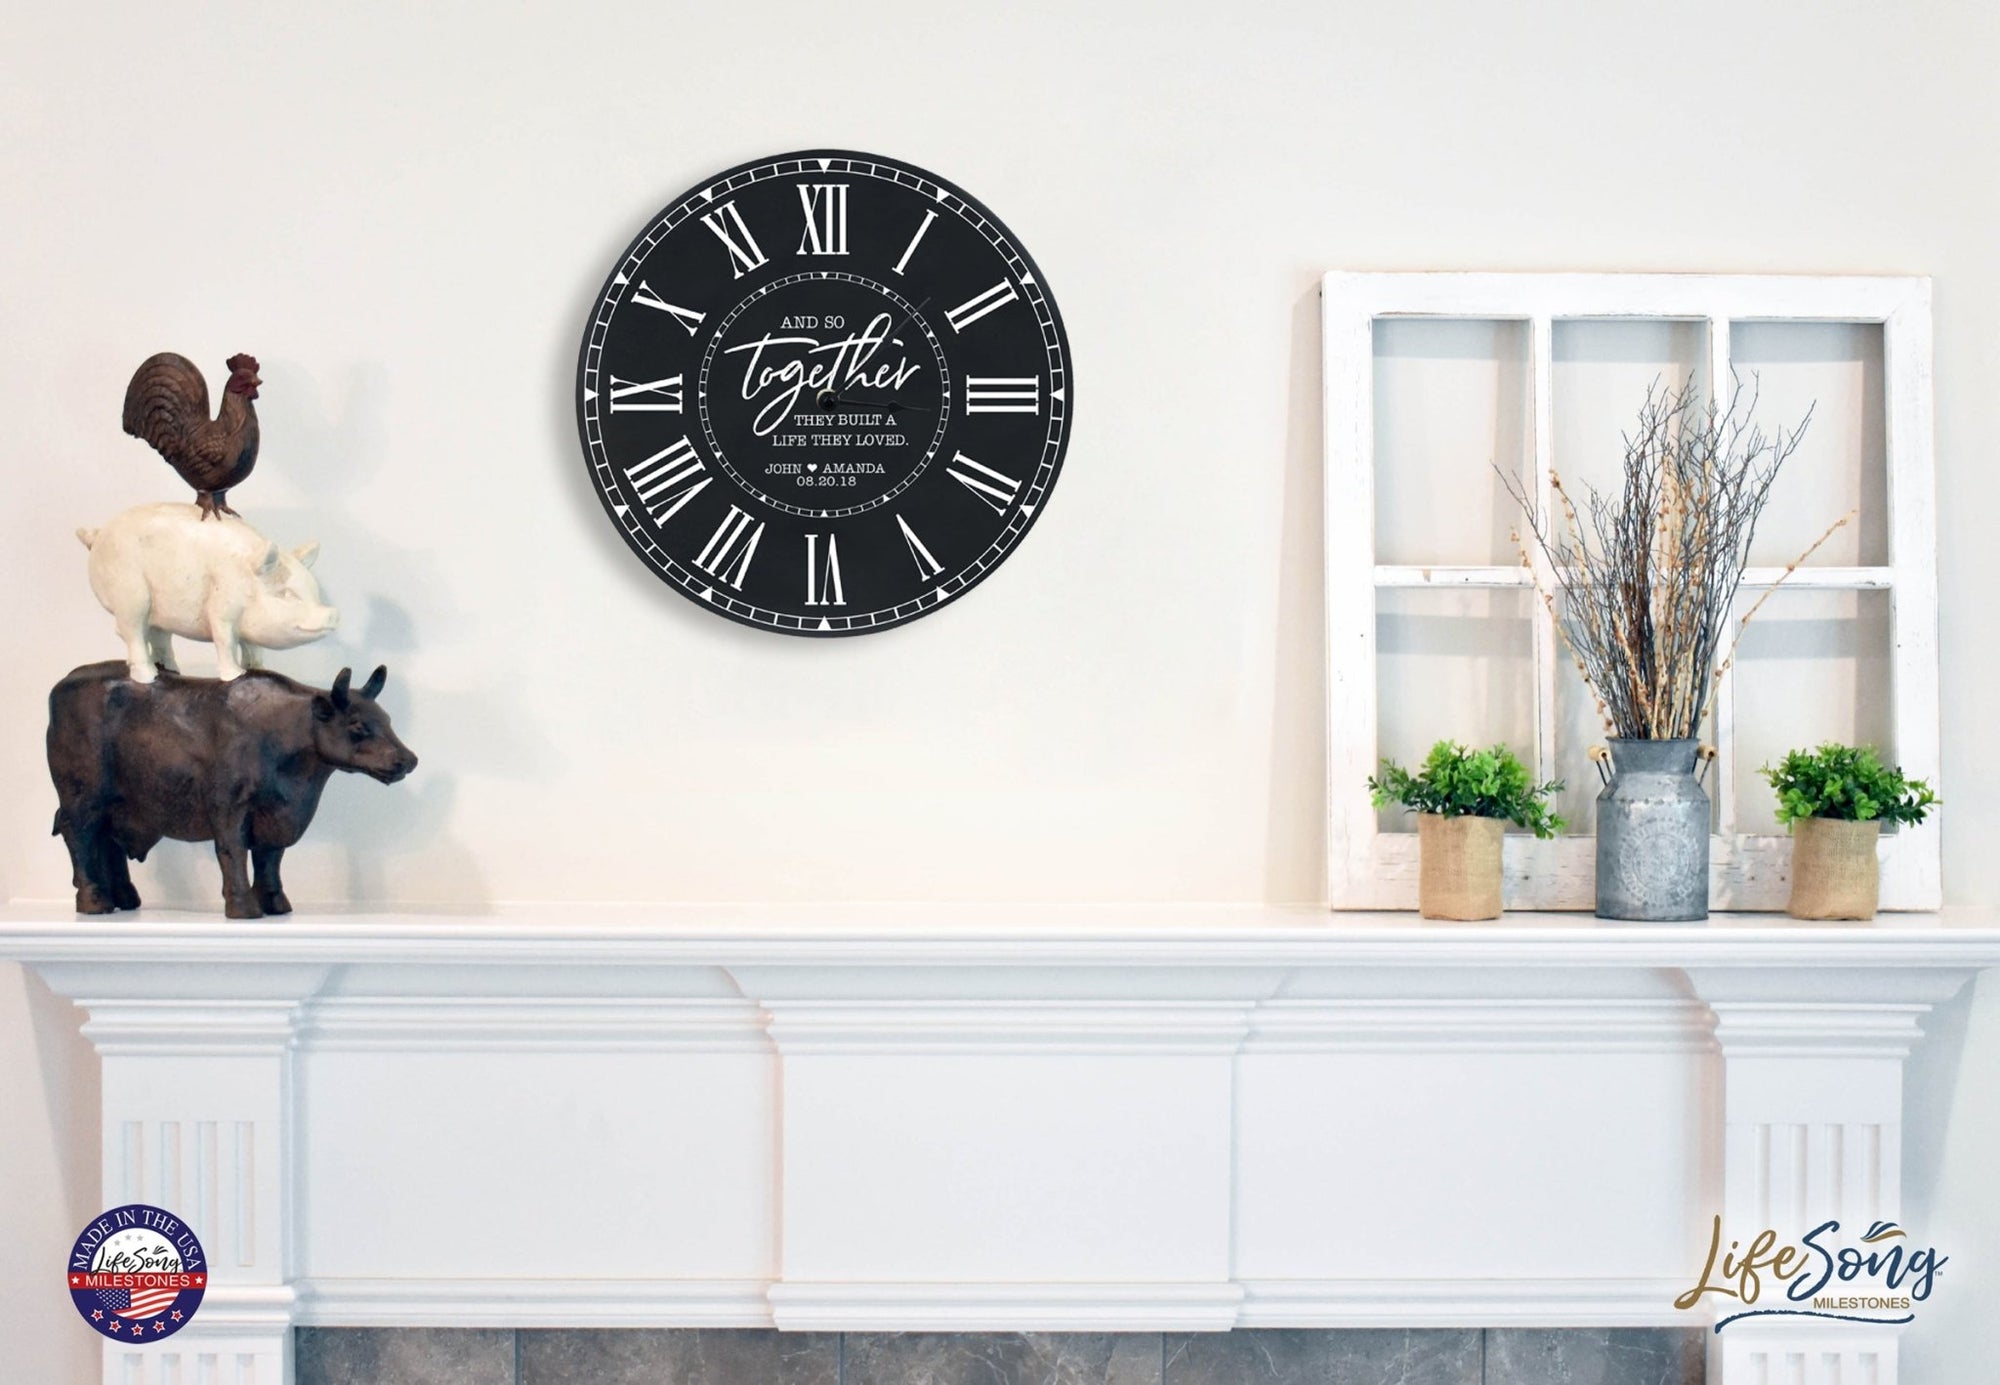 Custom Everyday Home and Family Clock 12” x .75” And So Together - LifeSong Milestones